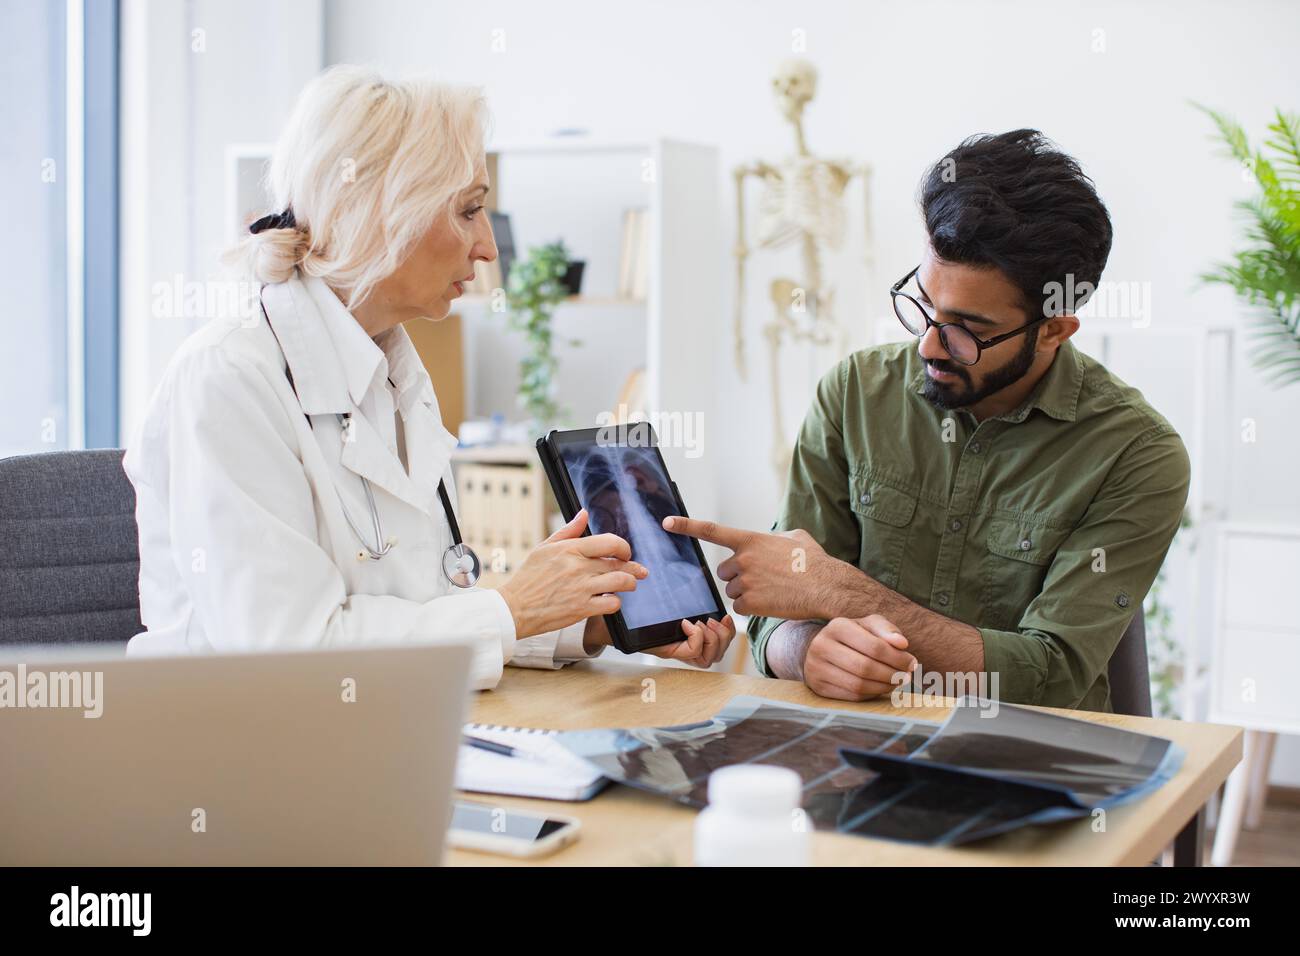 Family doctor examining diagnostic test results while developing treatment plan. Stock Photo